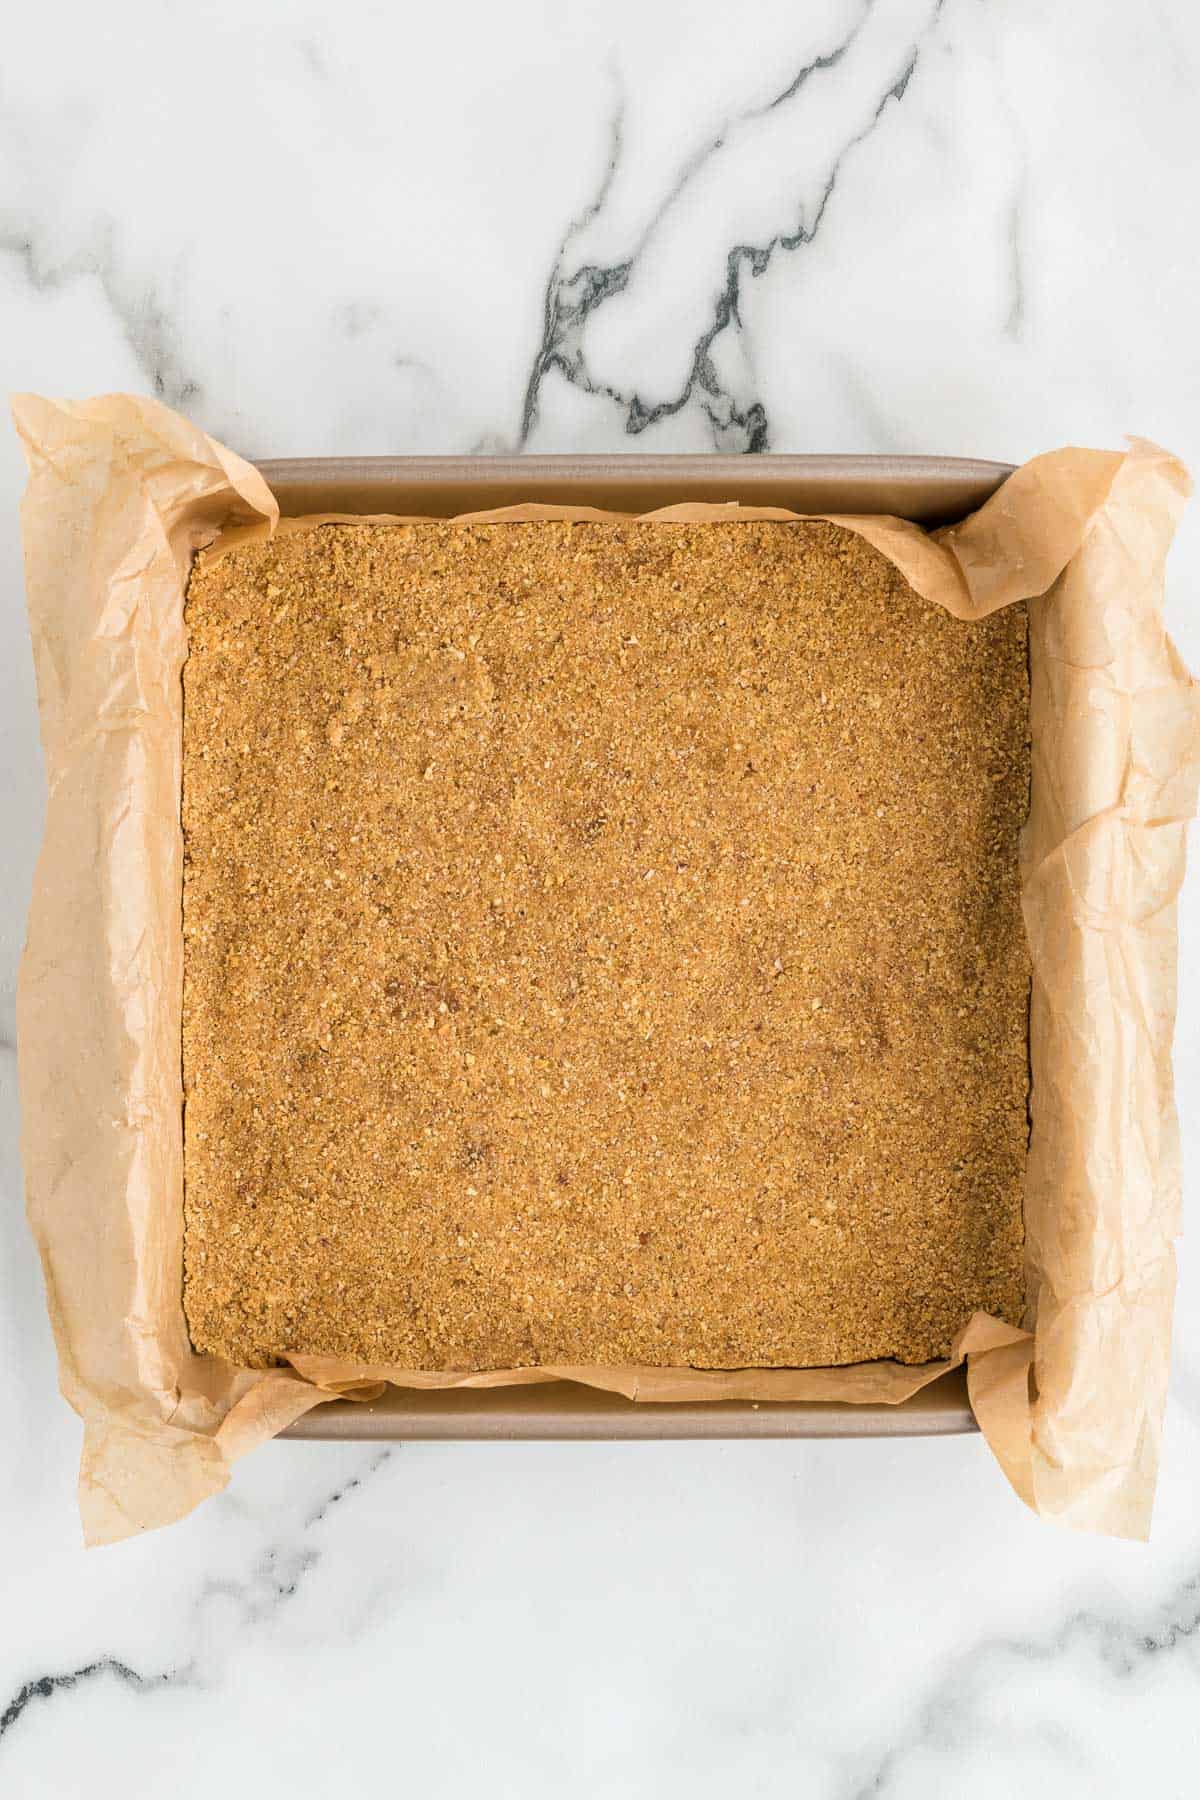 graham cracker crust in a square pan lined with parchment paper